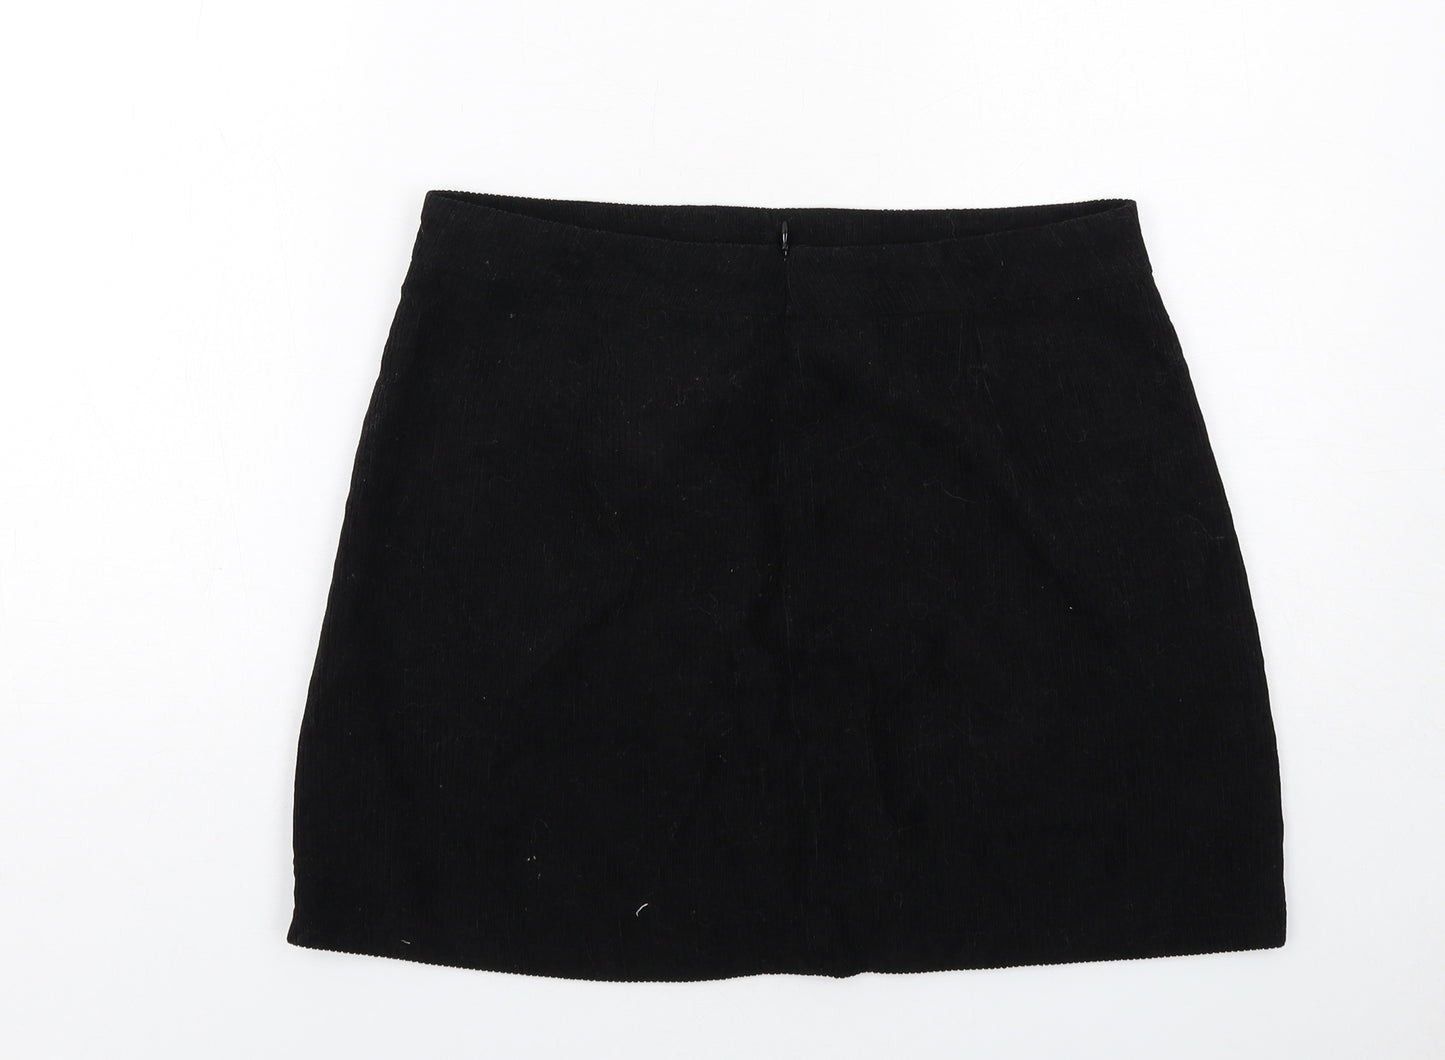 Reclaimed Vintage Womens Black Polyester A-Line Skirt Size 14 Zip